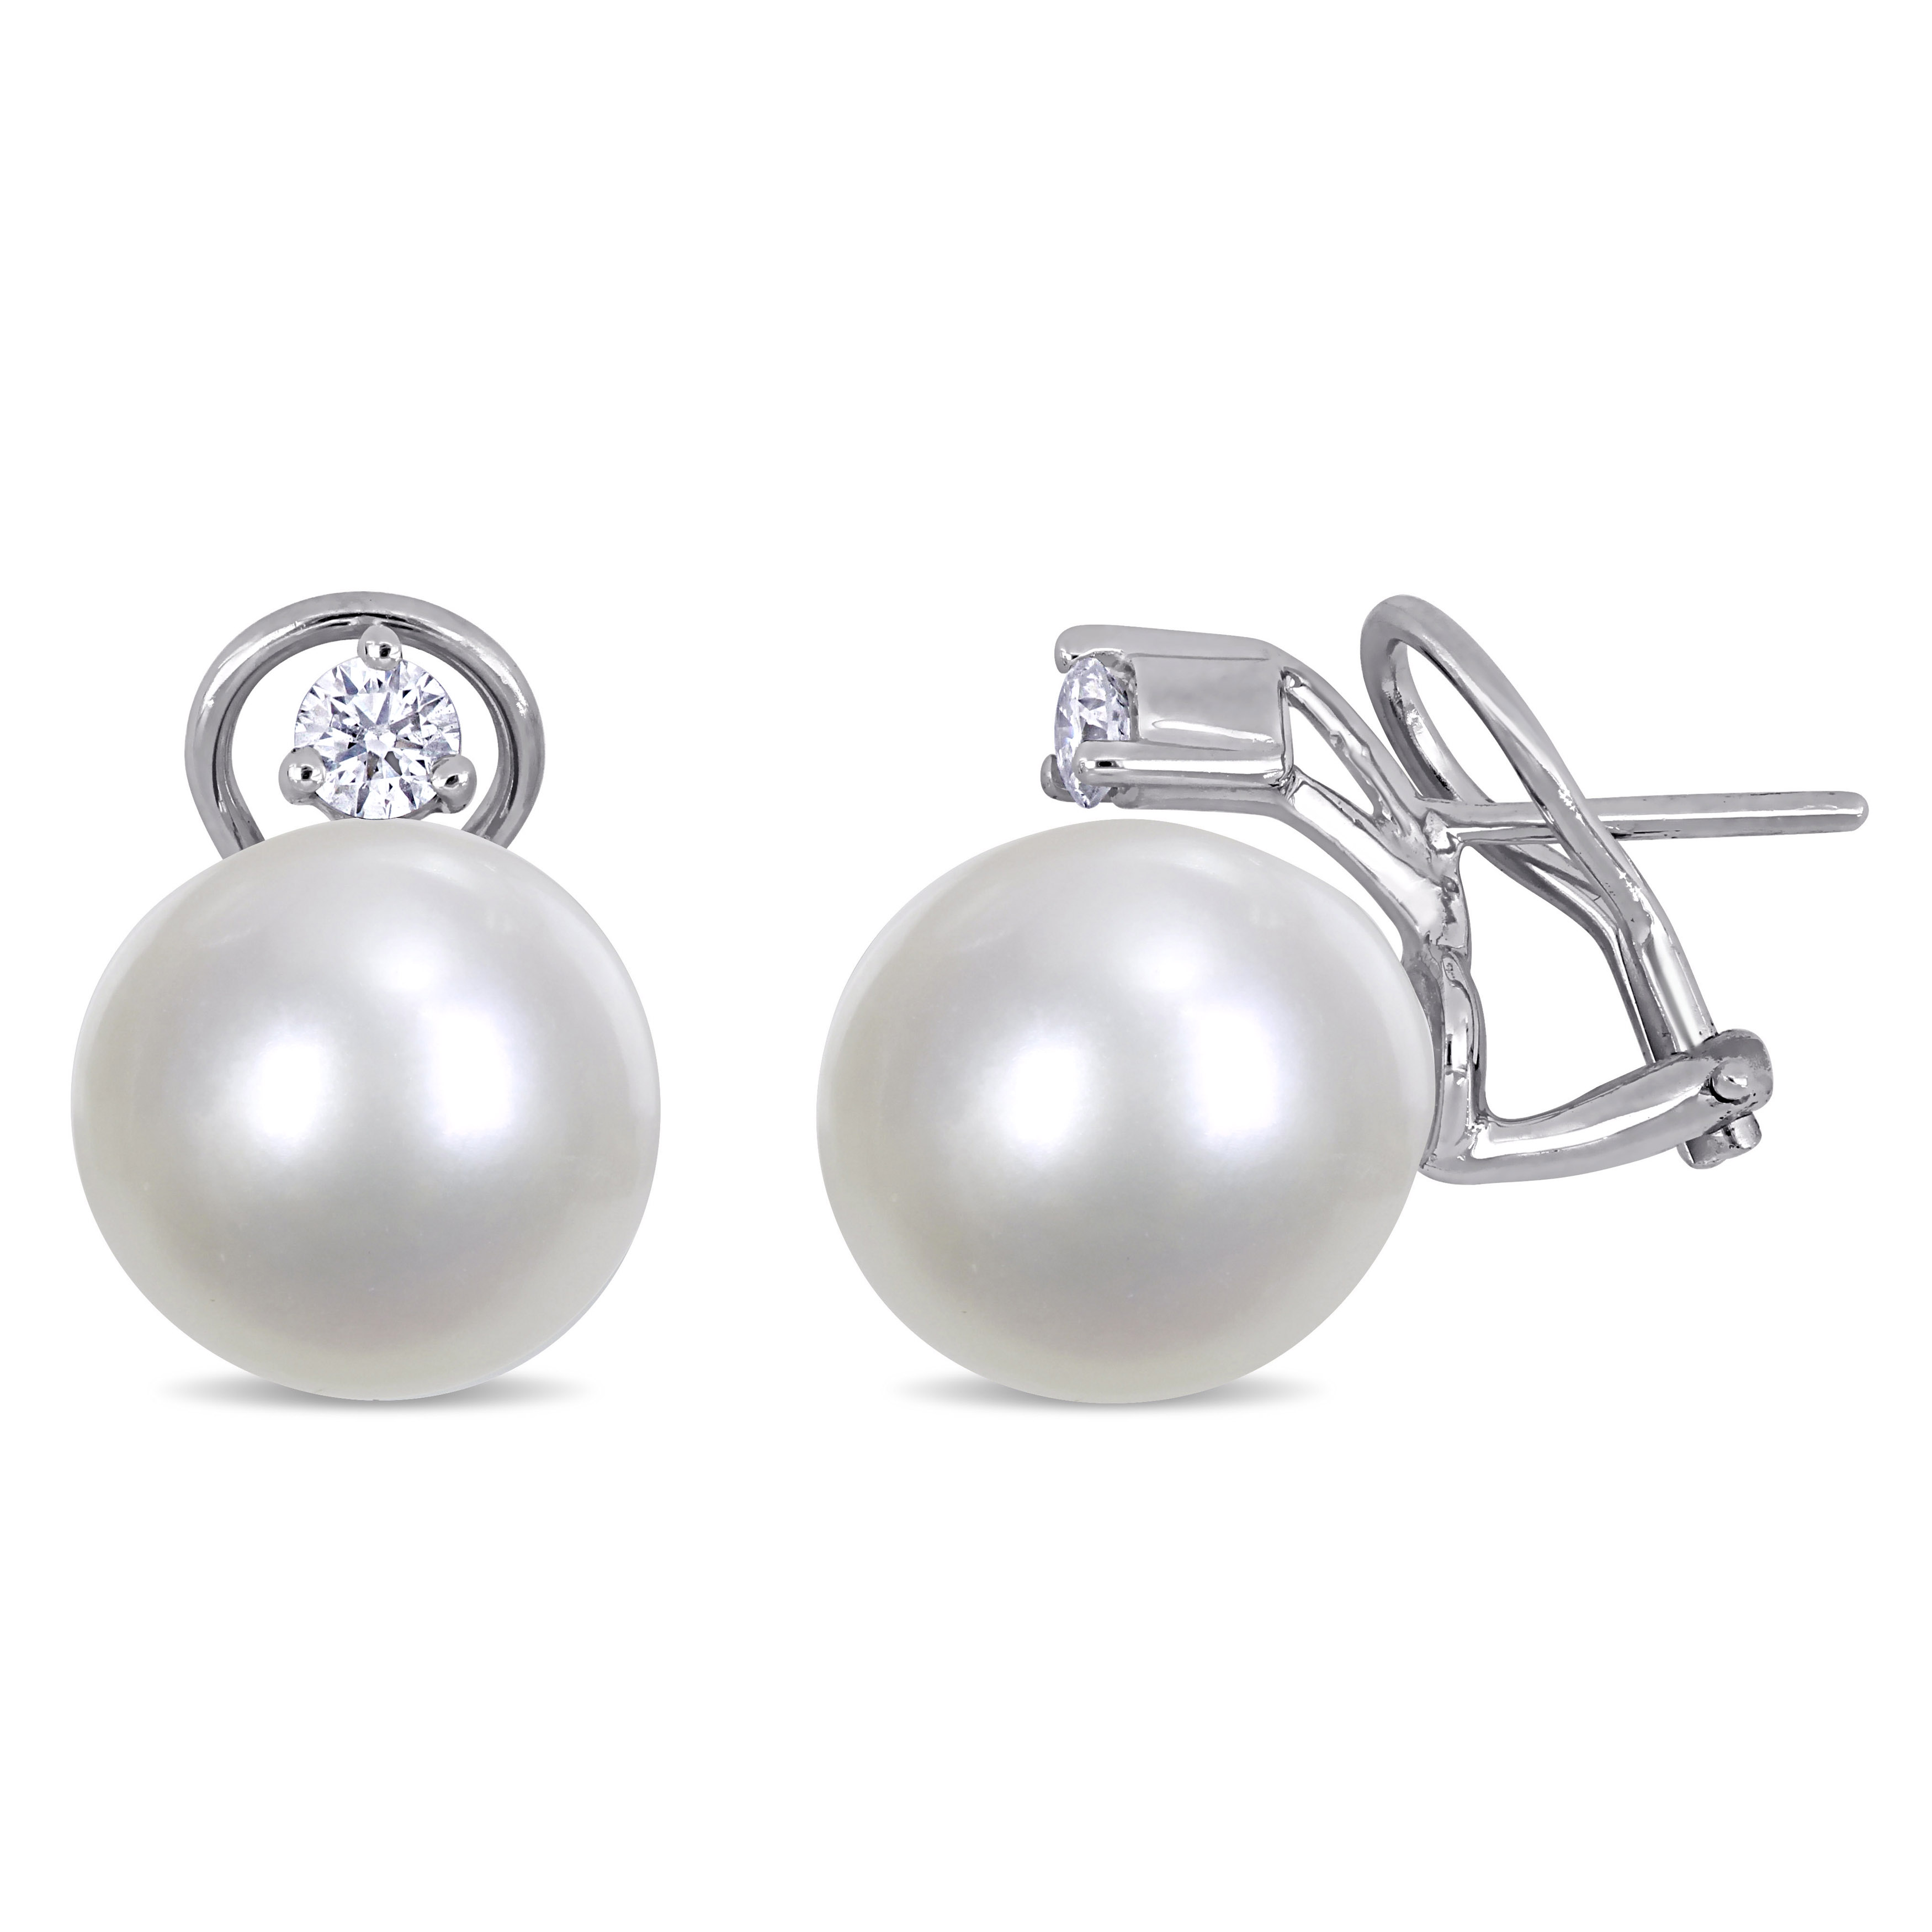 12 - 13 MM South Sea Cultured Pearl and 1/3 CT TW Diamond Stud Earrings in 14k White Gold